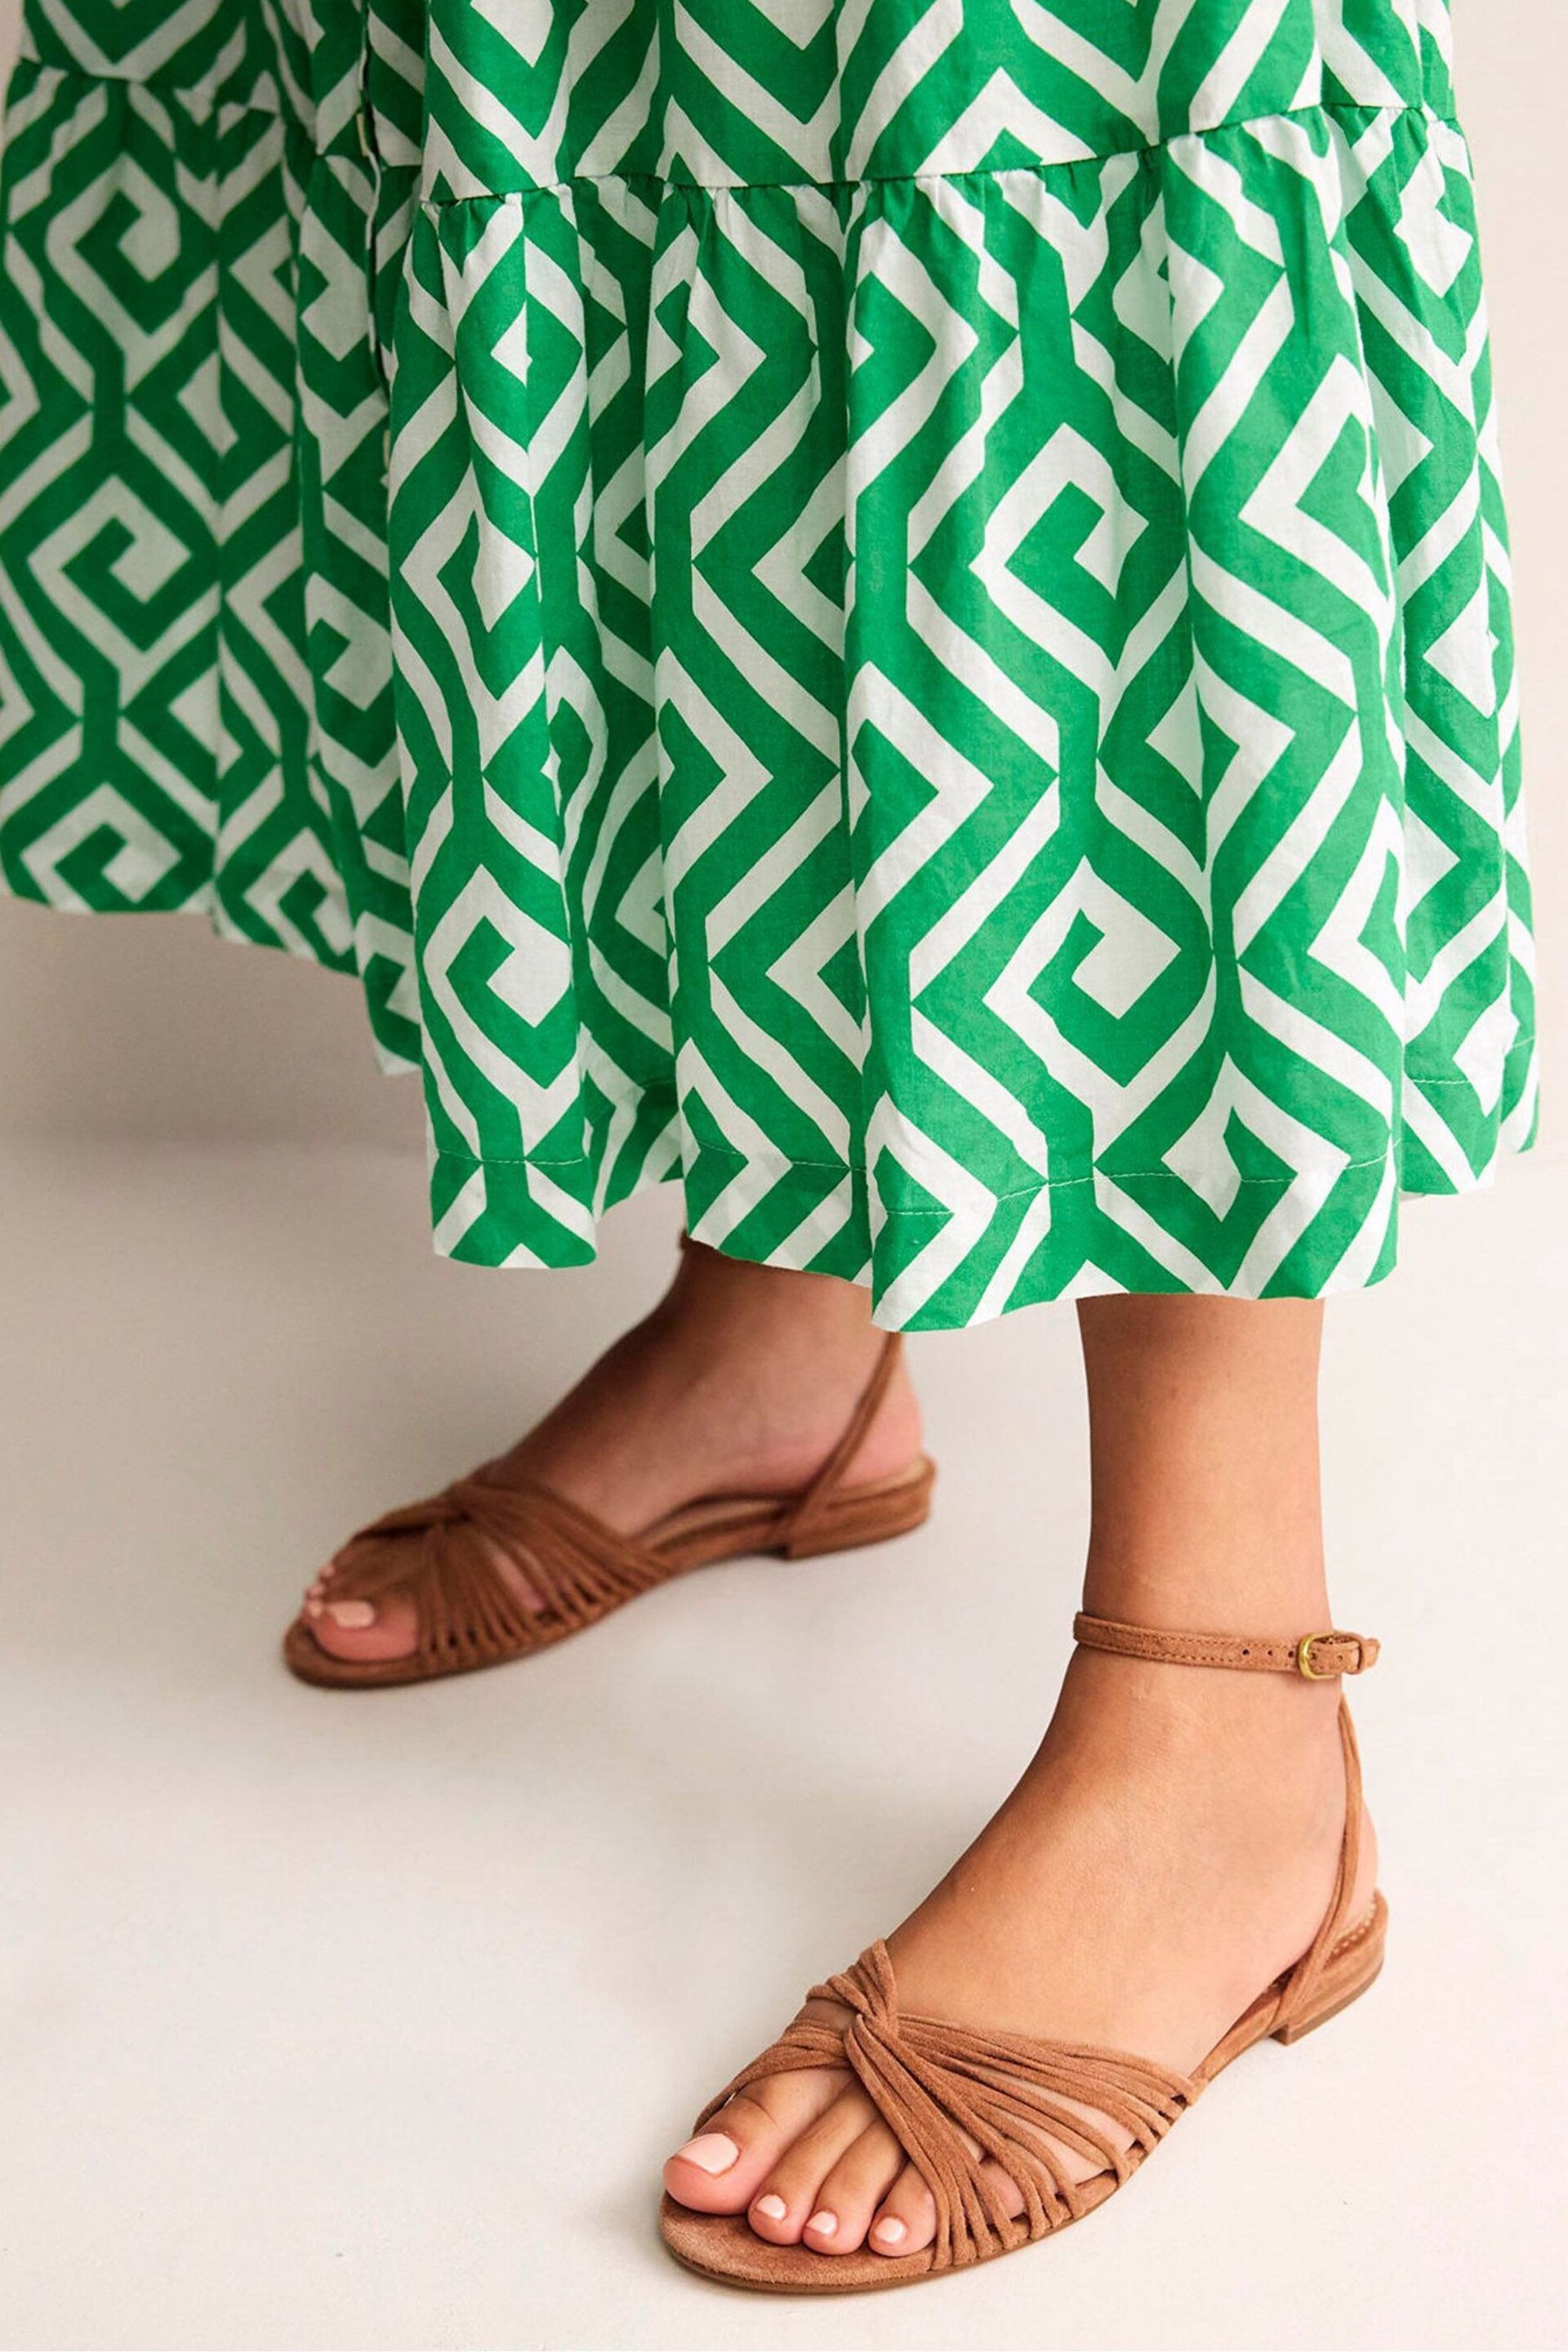 Boden Brown Twist Front Flat Sandals - Image 1 of 4